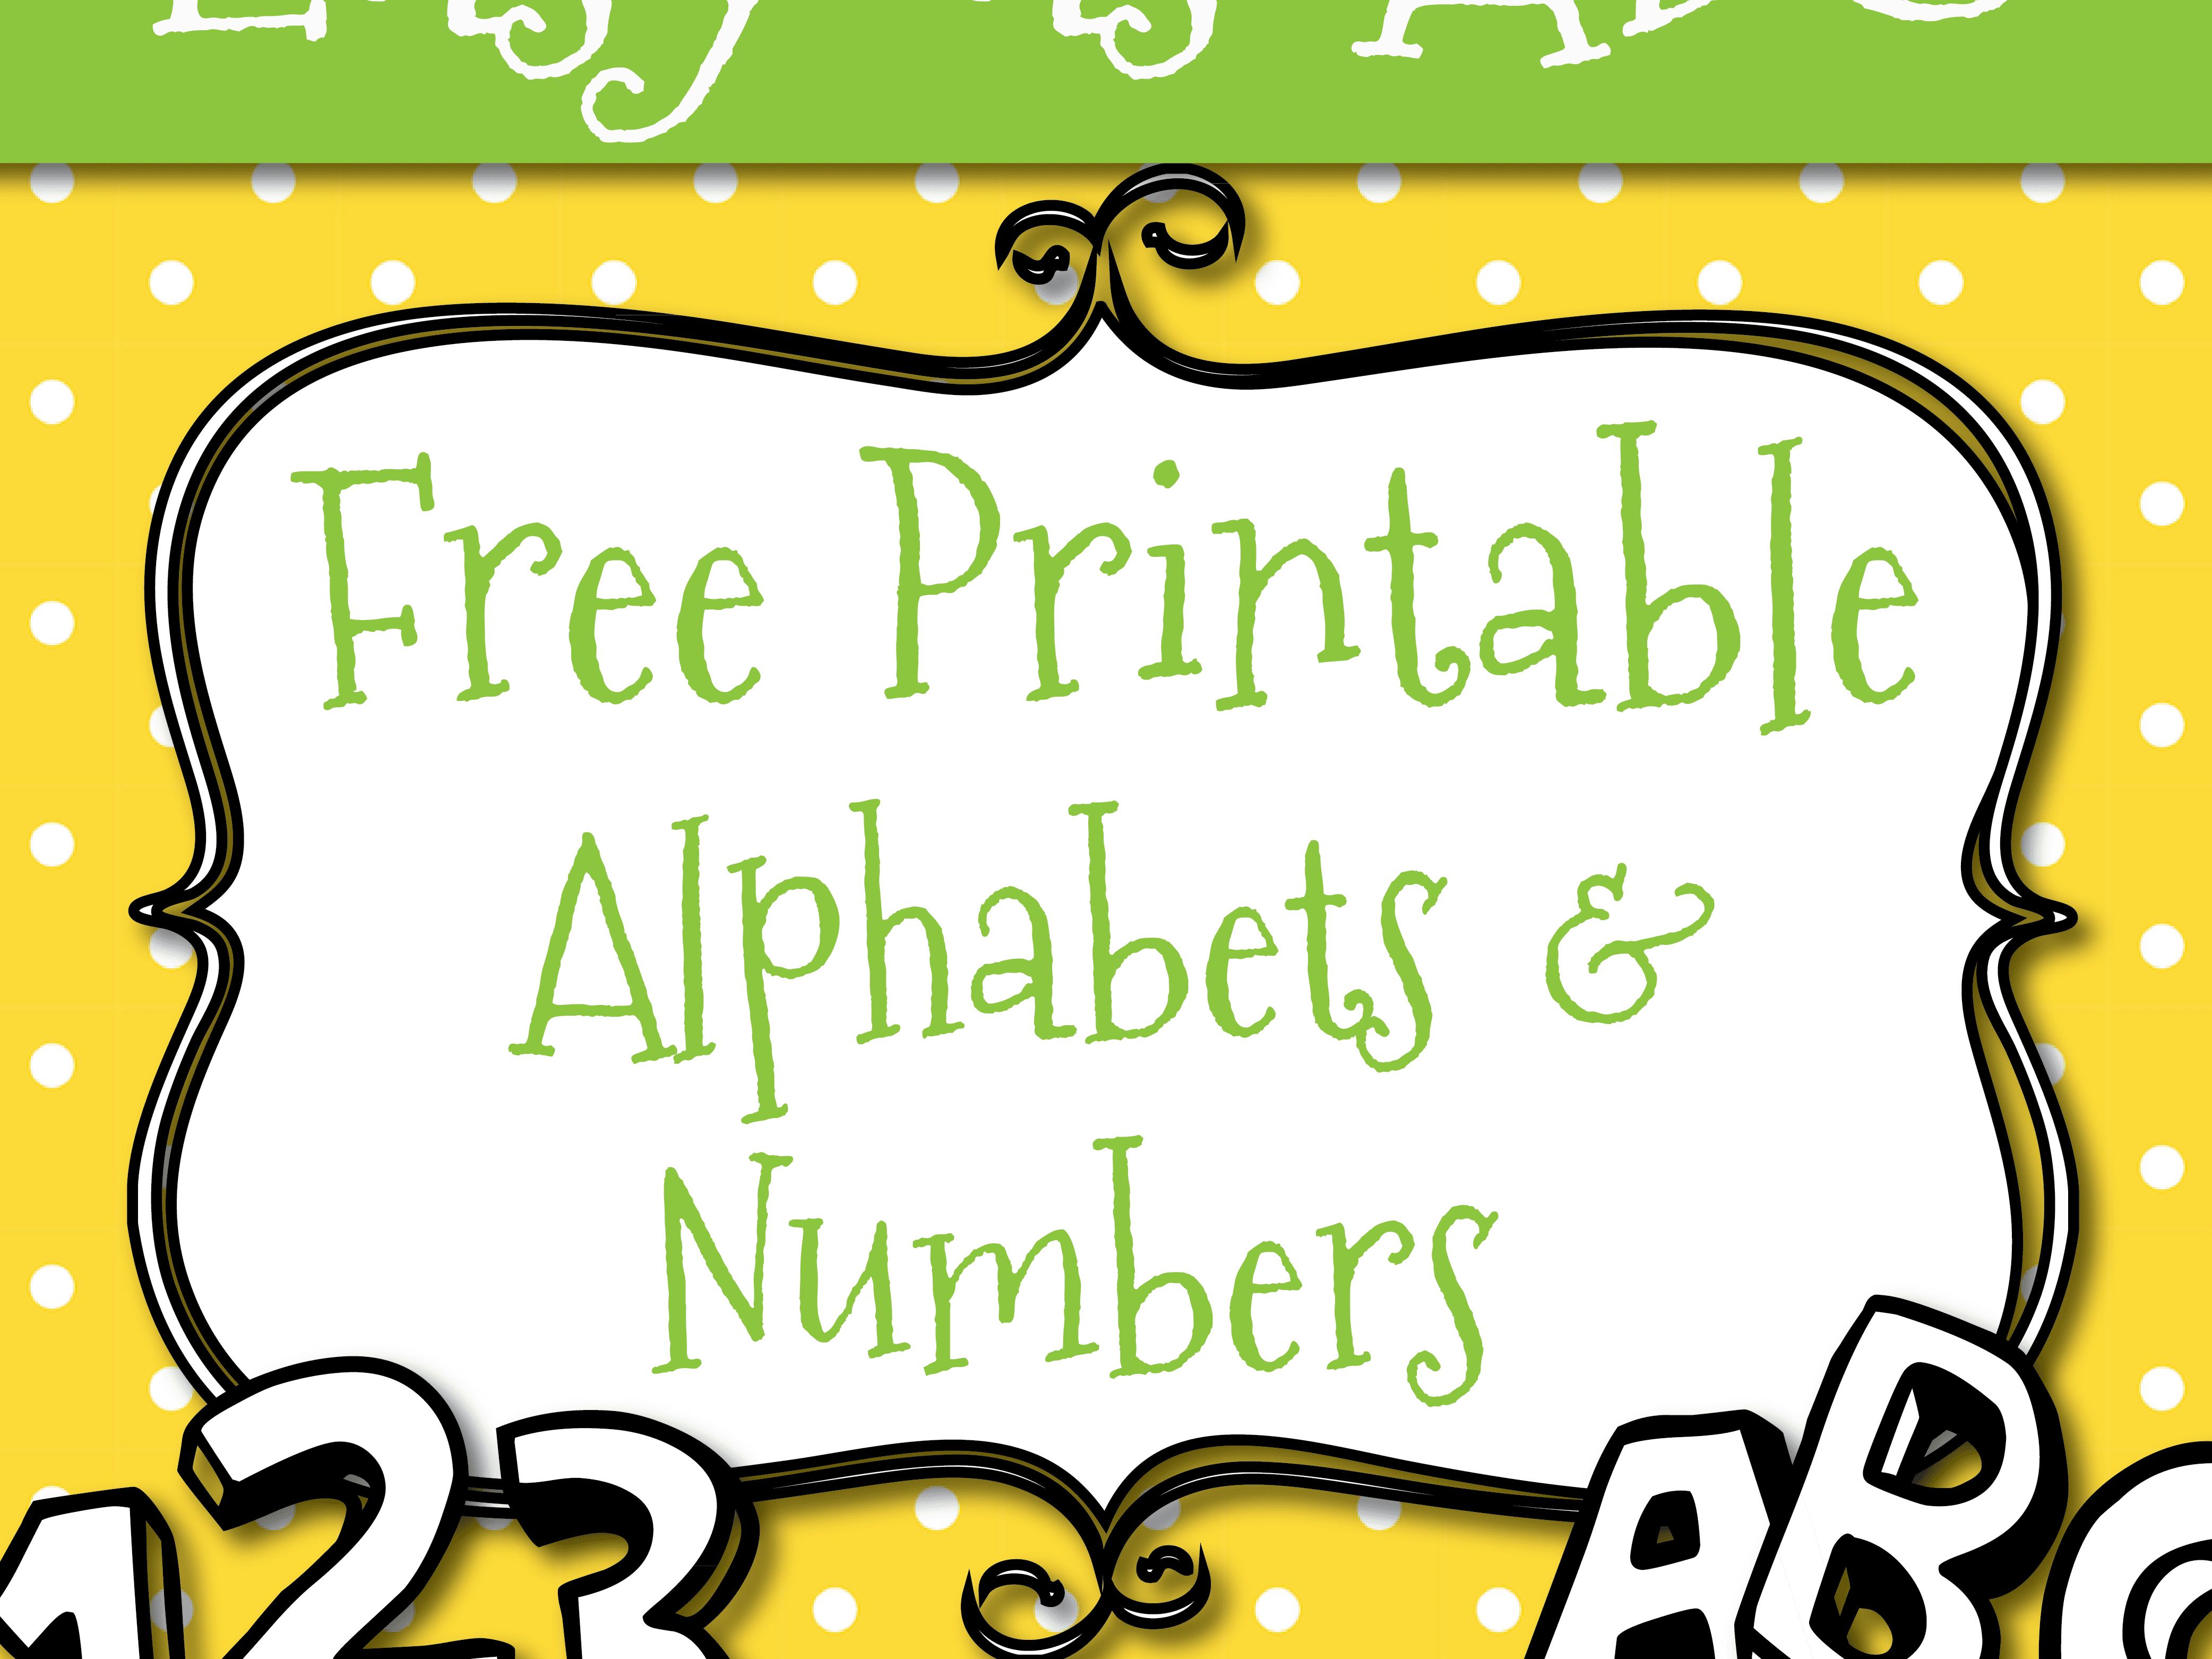 Free Printable Letters And Numbers For Crafts - Free Printable Letters